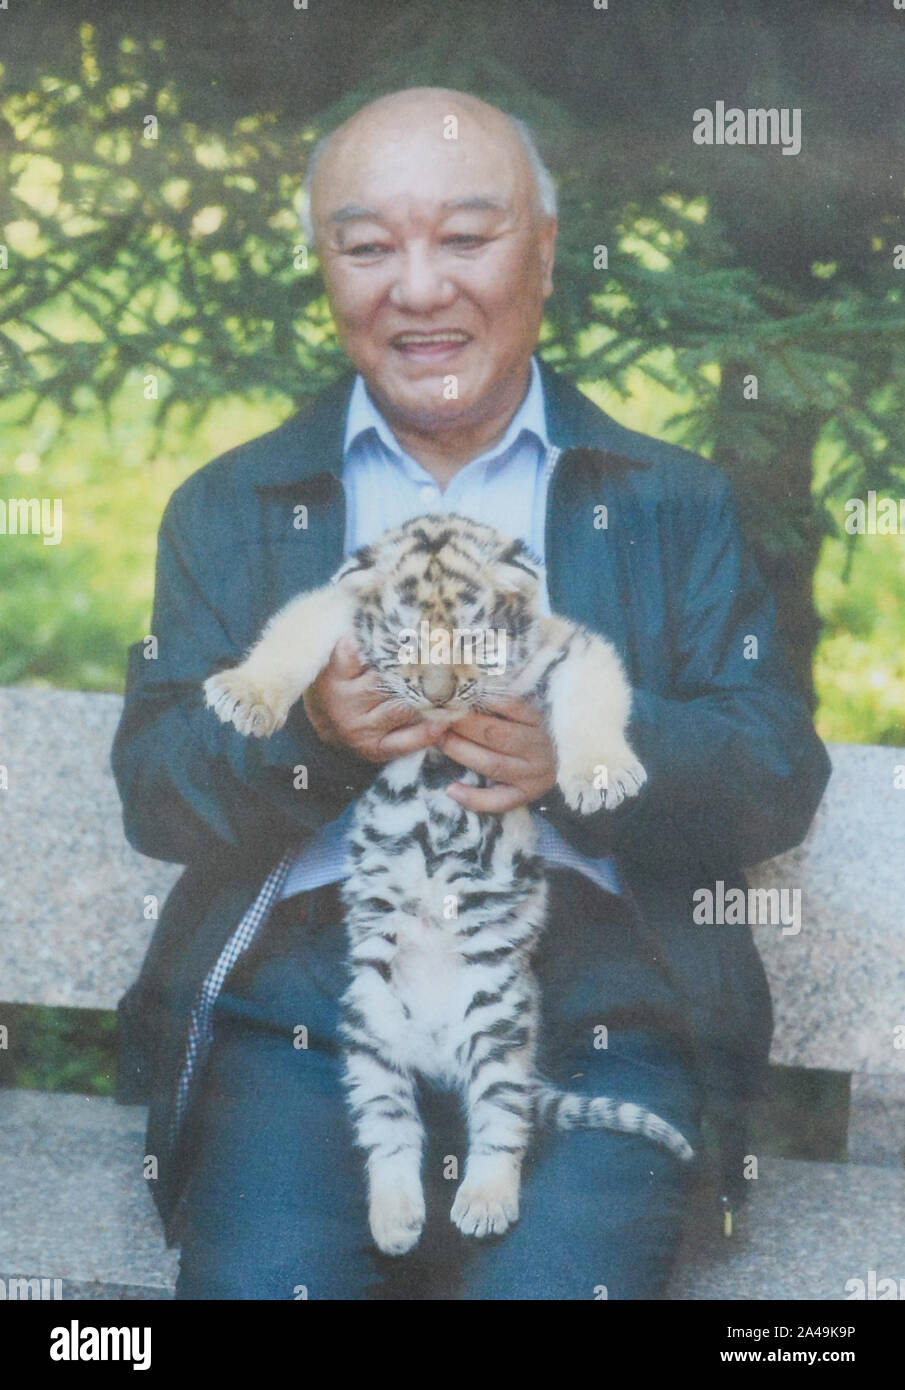 Beijing, China. 13th Oct, 2019. This undated file photo shows Ma Jianzhang holding a tiger cub. Credit: Xinhua/Alamy Live News Stock Photo